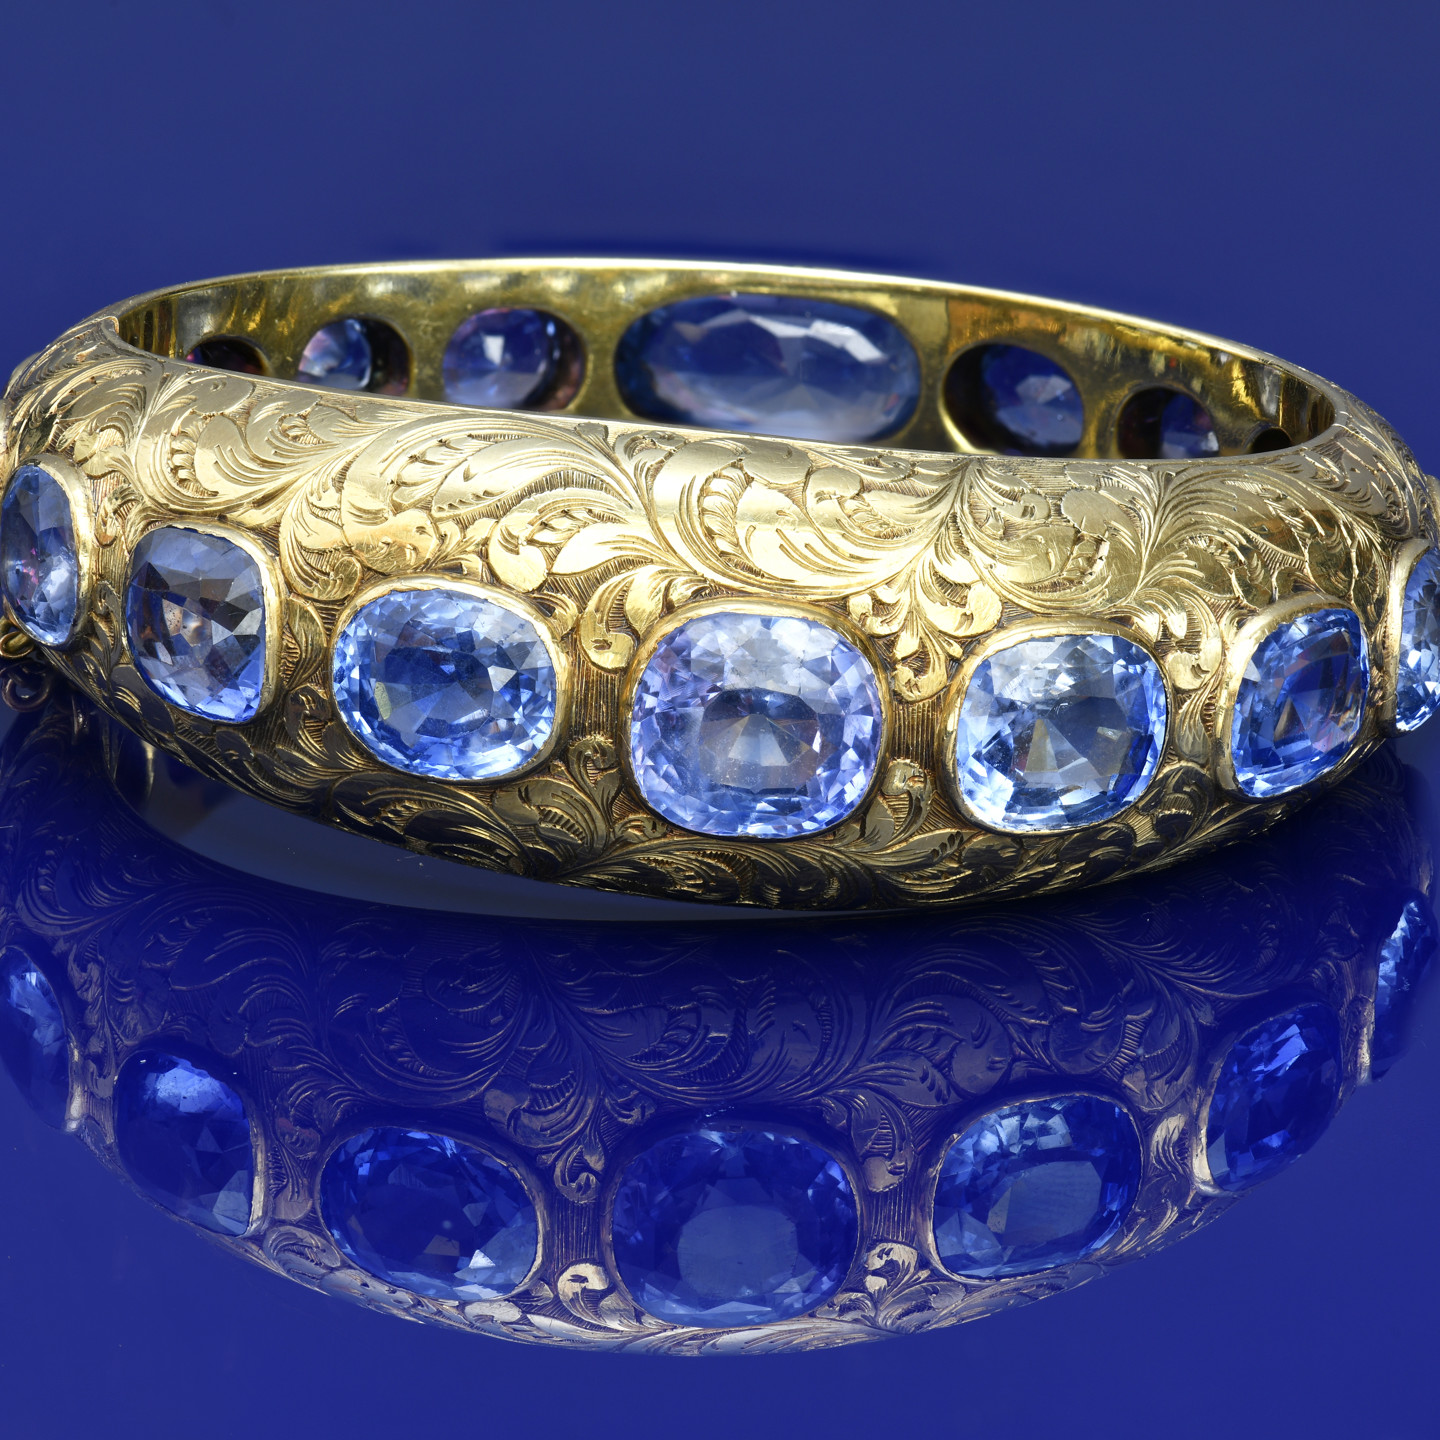 A c1900 18ct gold bangle with engraved floral decoration, set with seventeen cushion cut Ceylon Sapphires, the total sapphire weight approximately 68ct, 55.3g